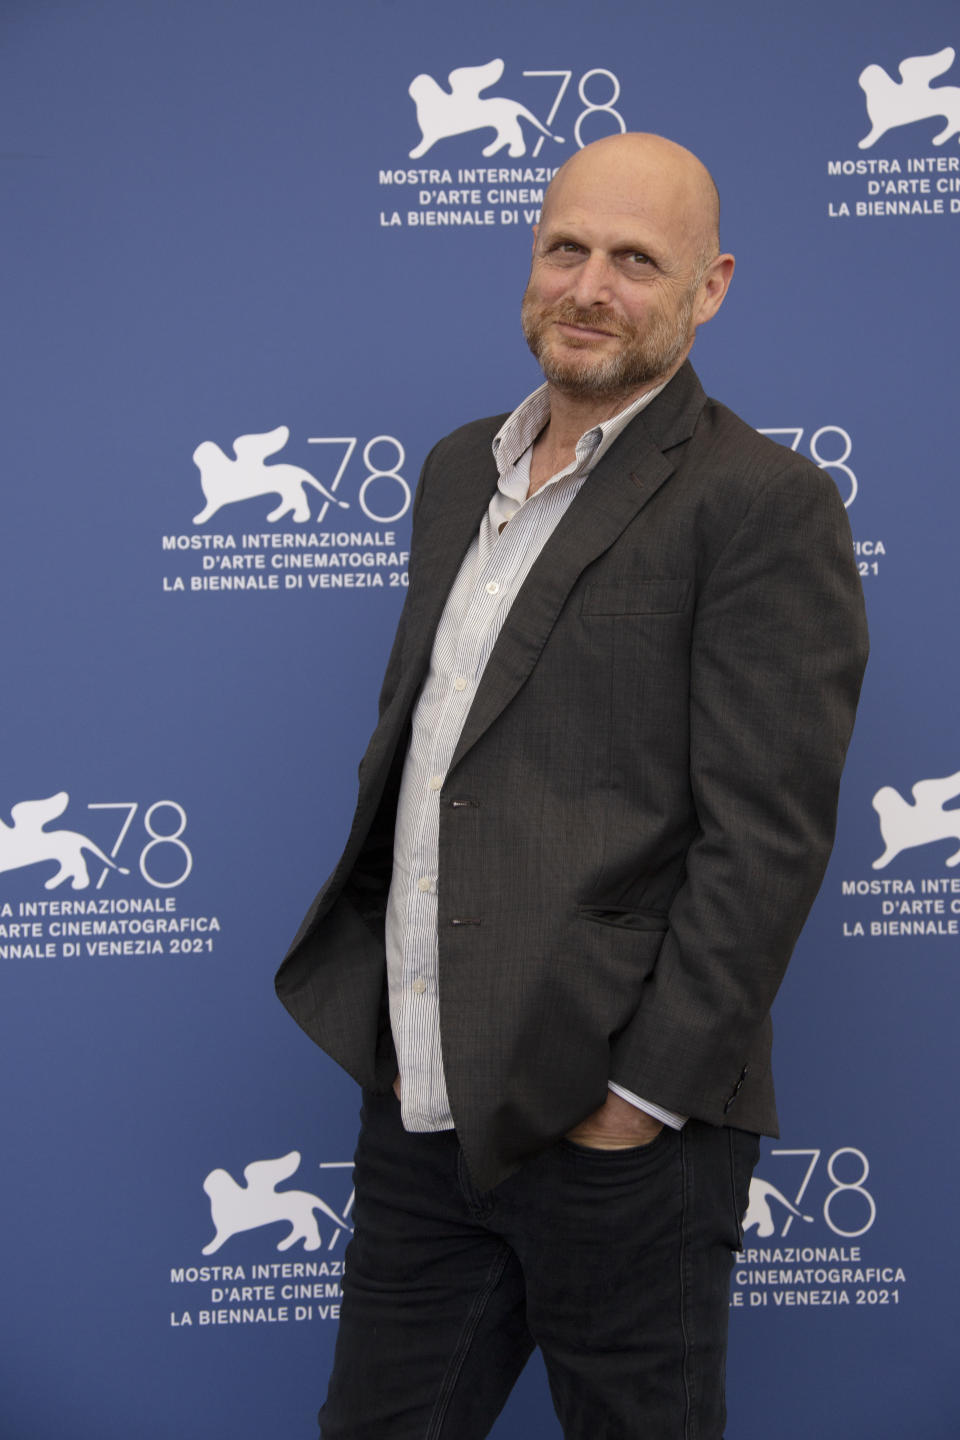 Hagai Levi poses for photographers at the photo call for the film 'Scenes of a Marriage' during the 78th edition of the Venice Film Festival in Venice, Italy, Saturday, Sep, 4, 2021. (Photo by Joel C Ryan/Invision/AP)